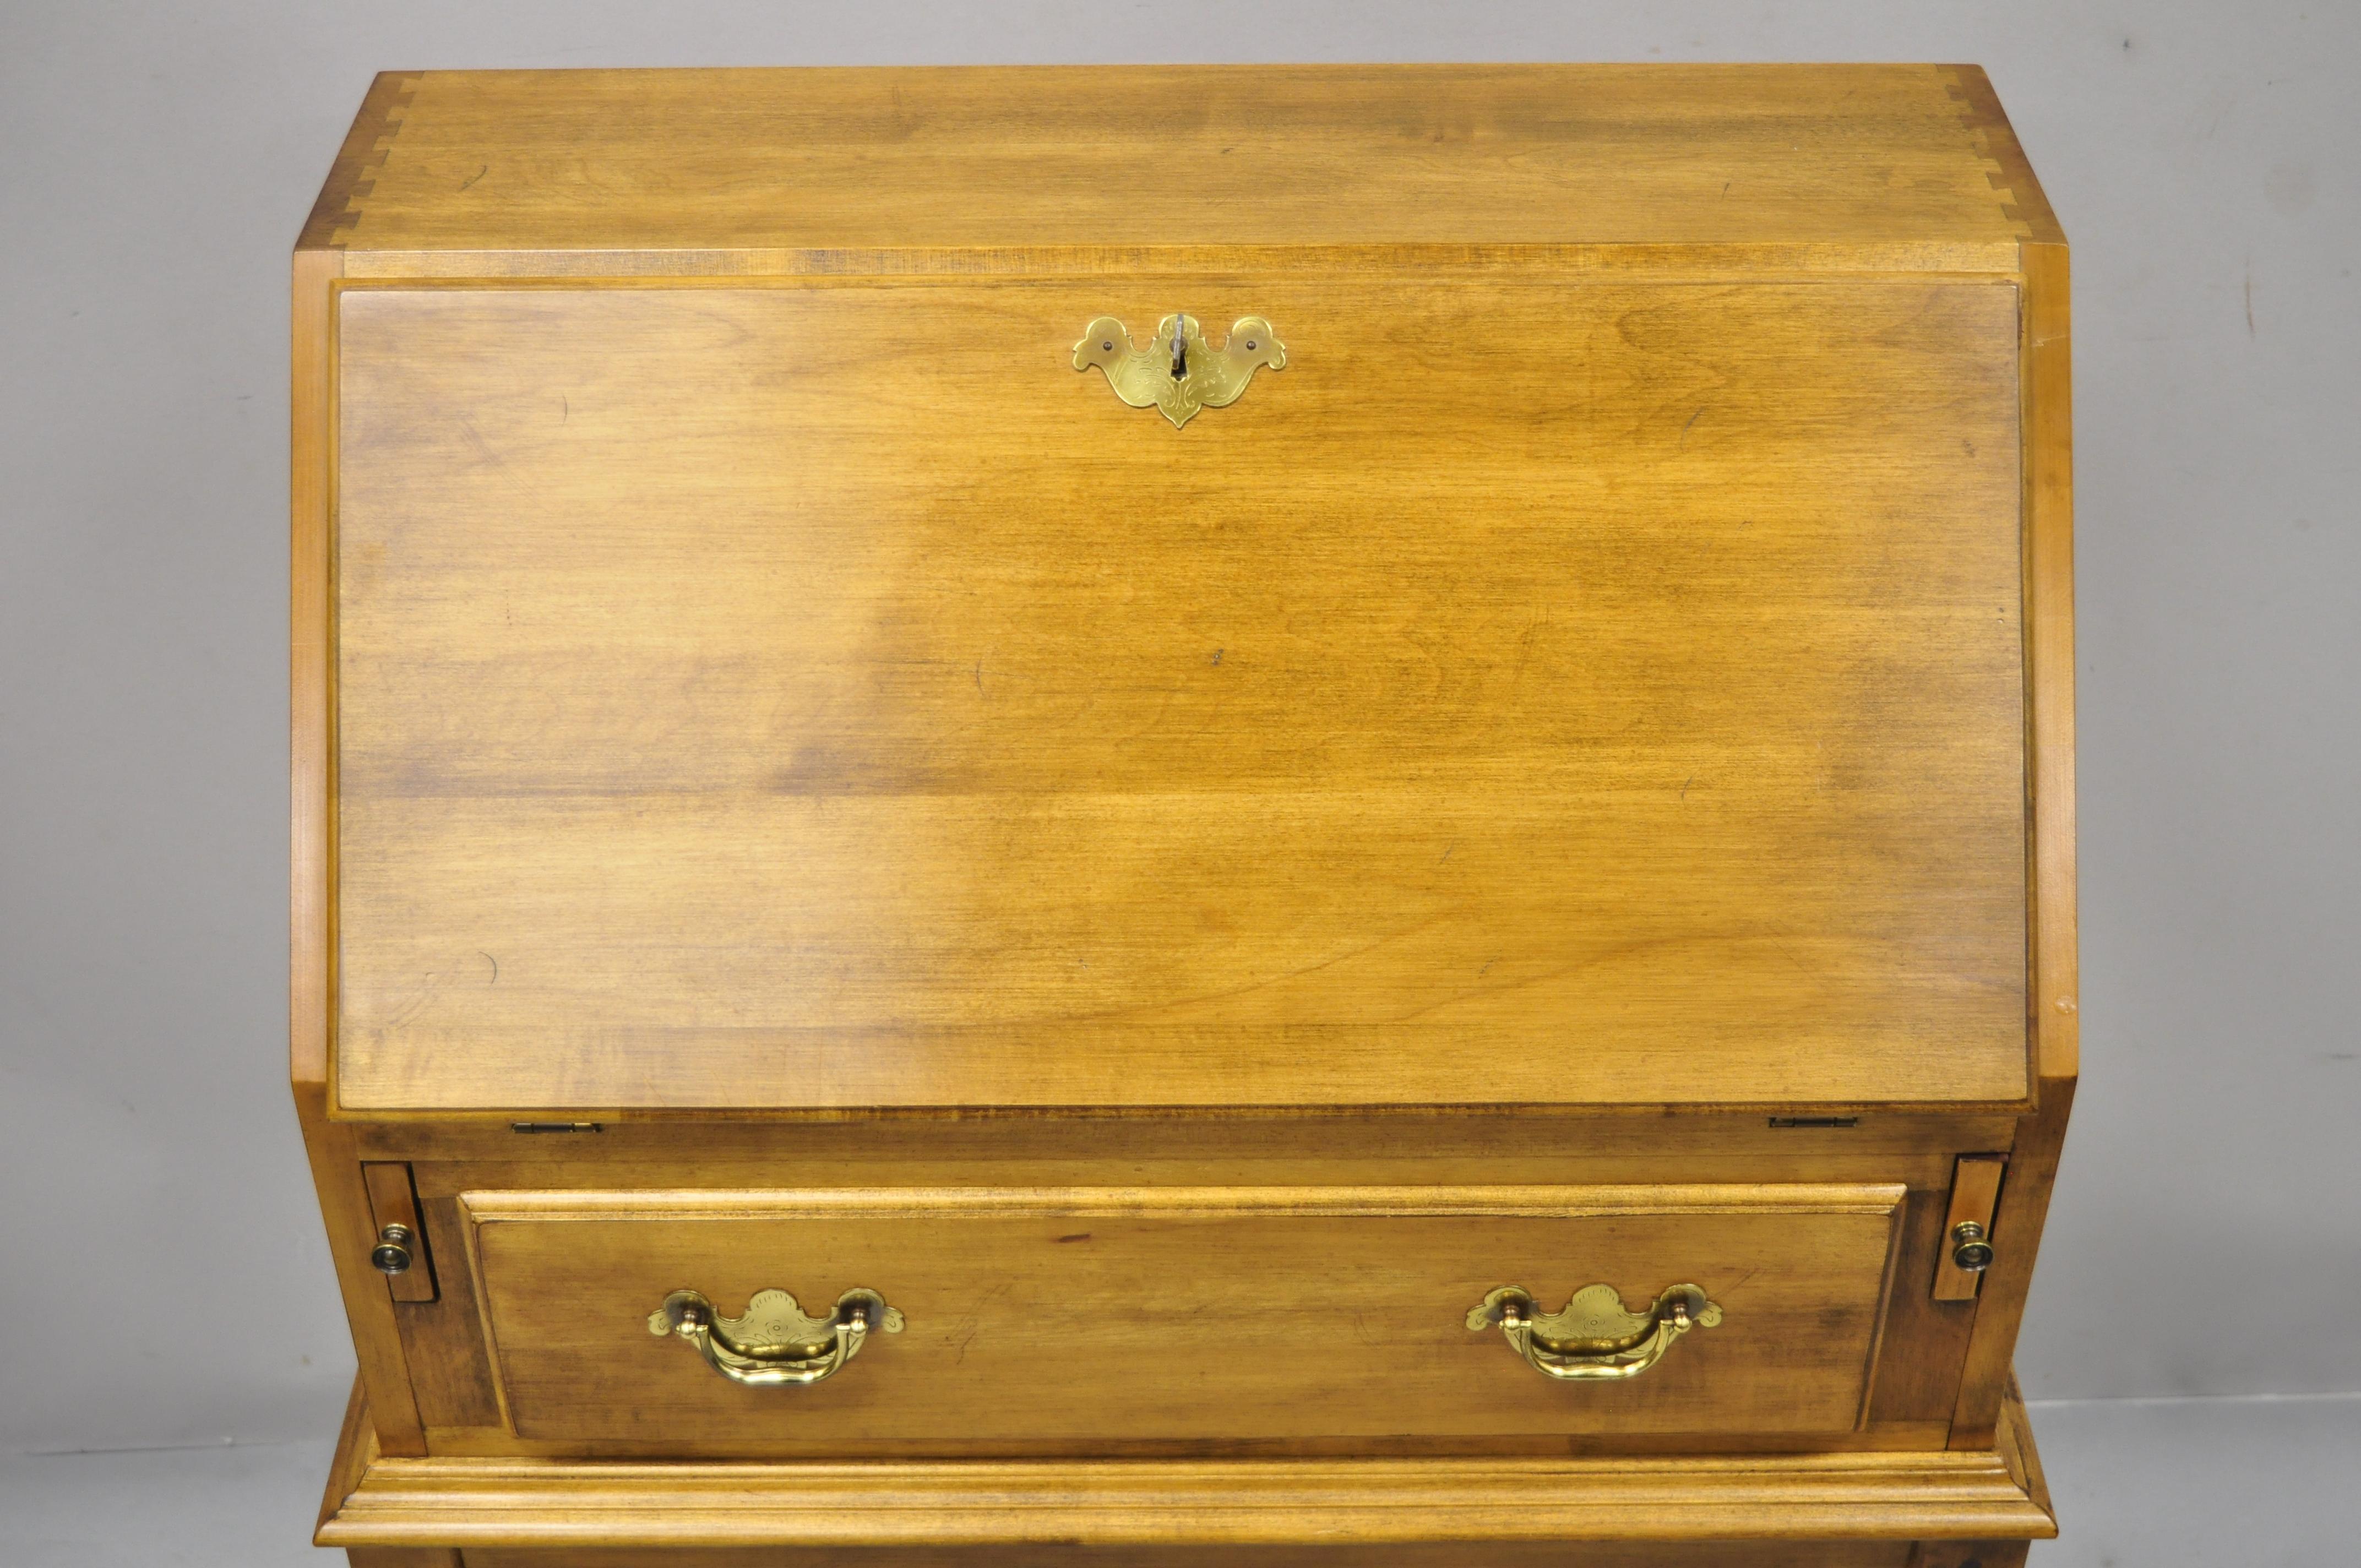 Ethan Allen circa 1776 maple drop lid slant front secretary desk. Item features solid wood construction, beautiful wood grain, original stamp, working lock and key, 1 dovetailed drawer, solid brass hardware, very nice vintage item, quality American